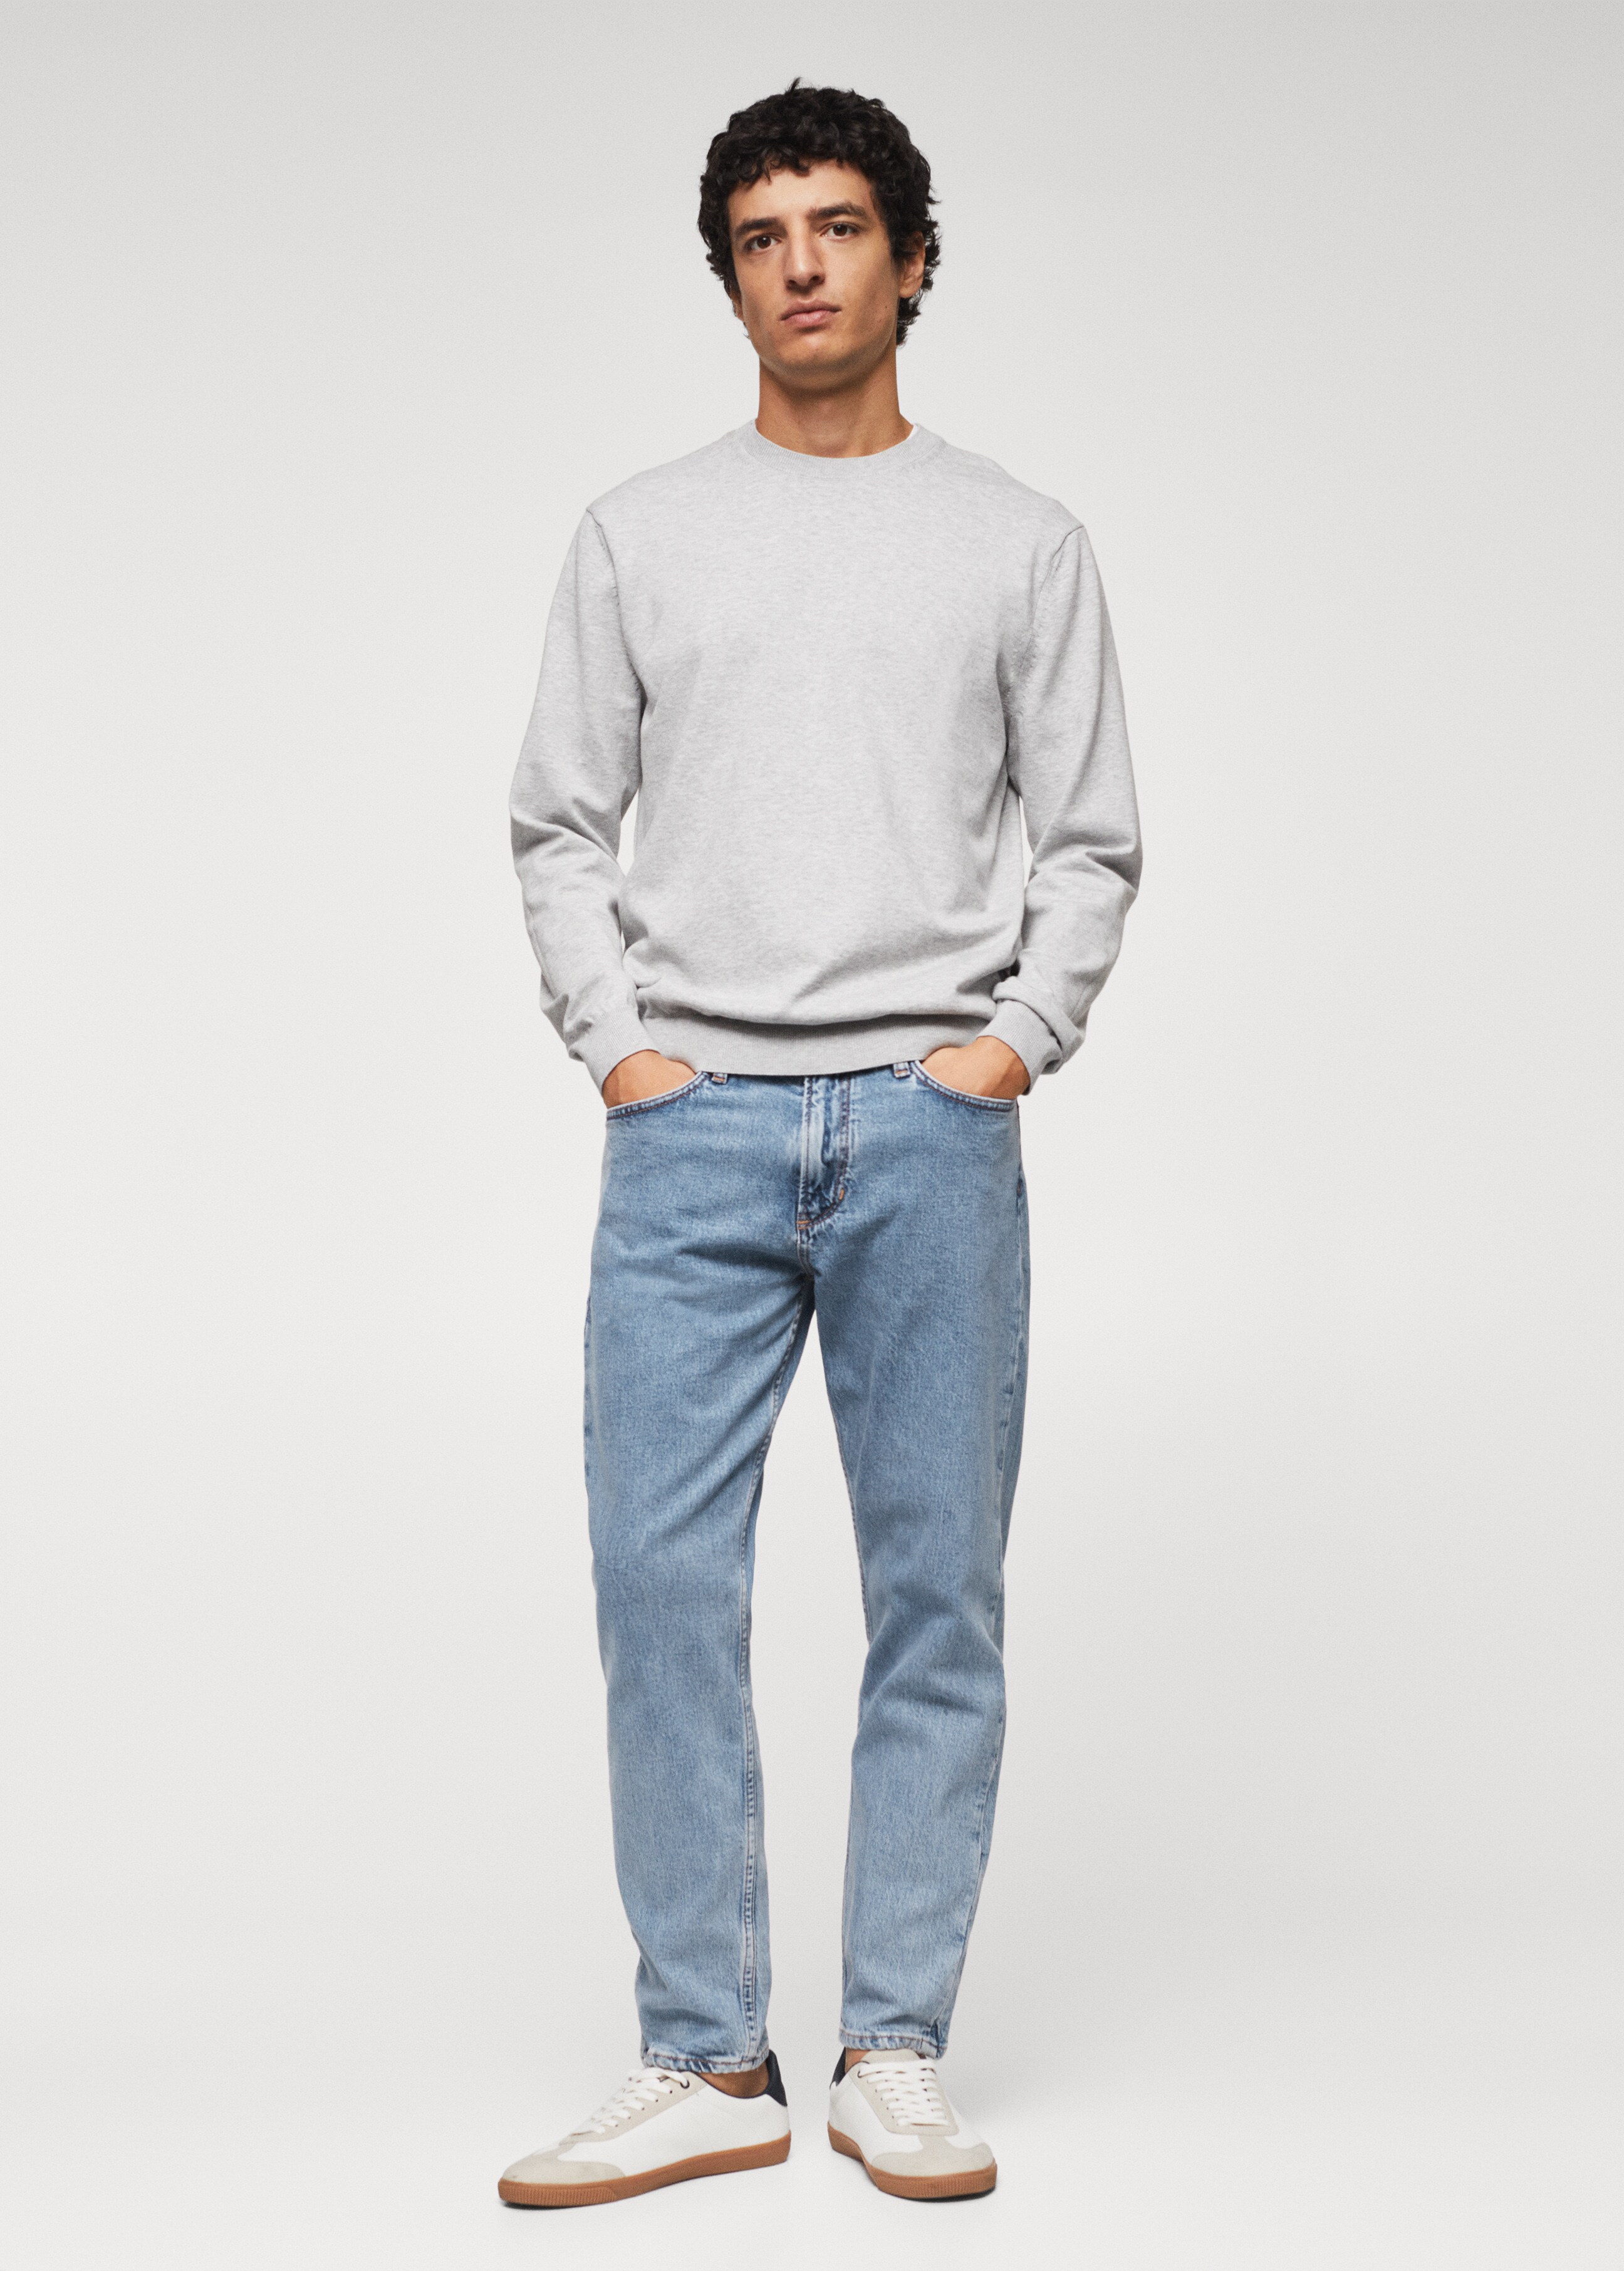 Texans Ben tapered cropped - Pla general